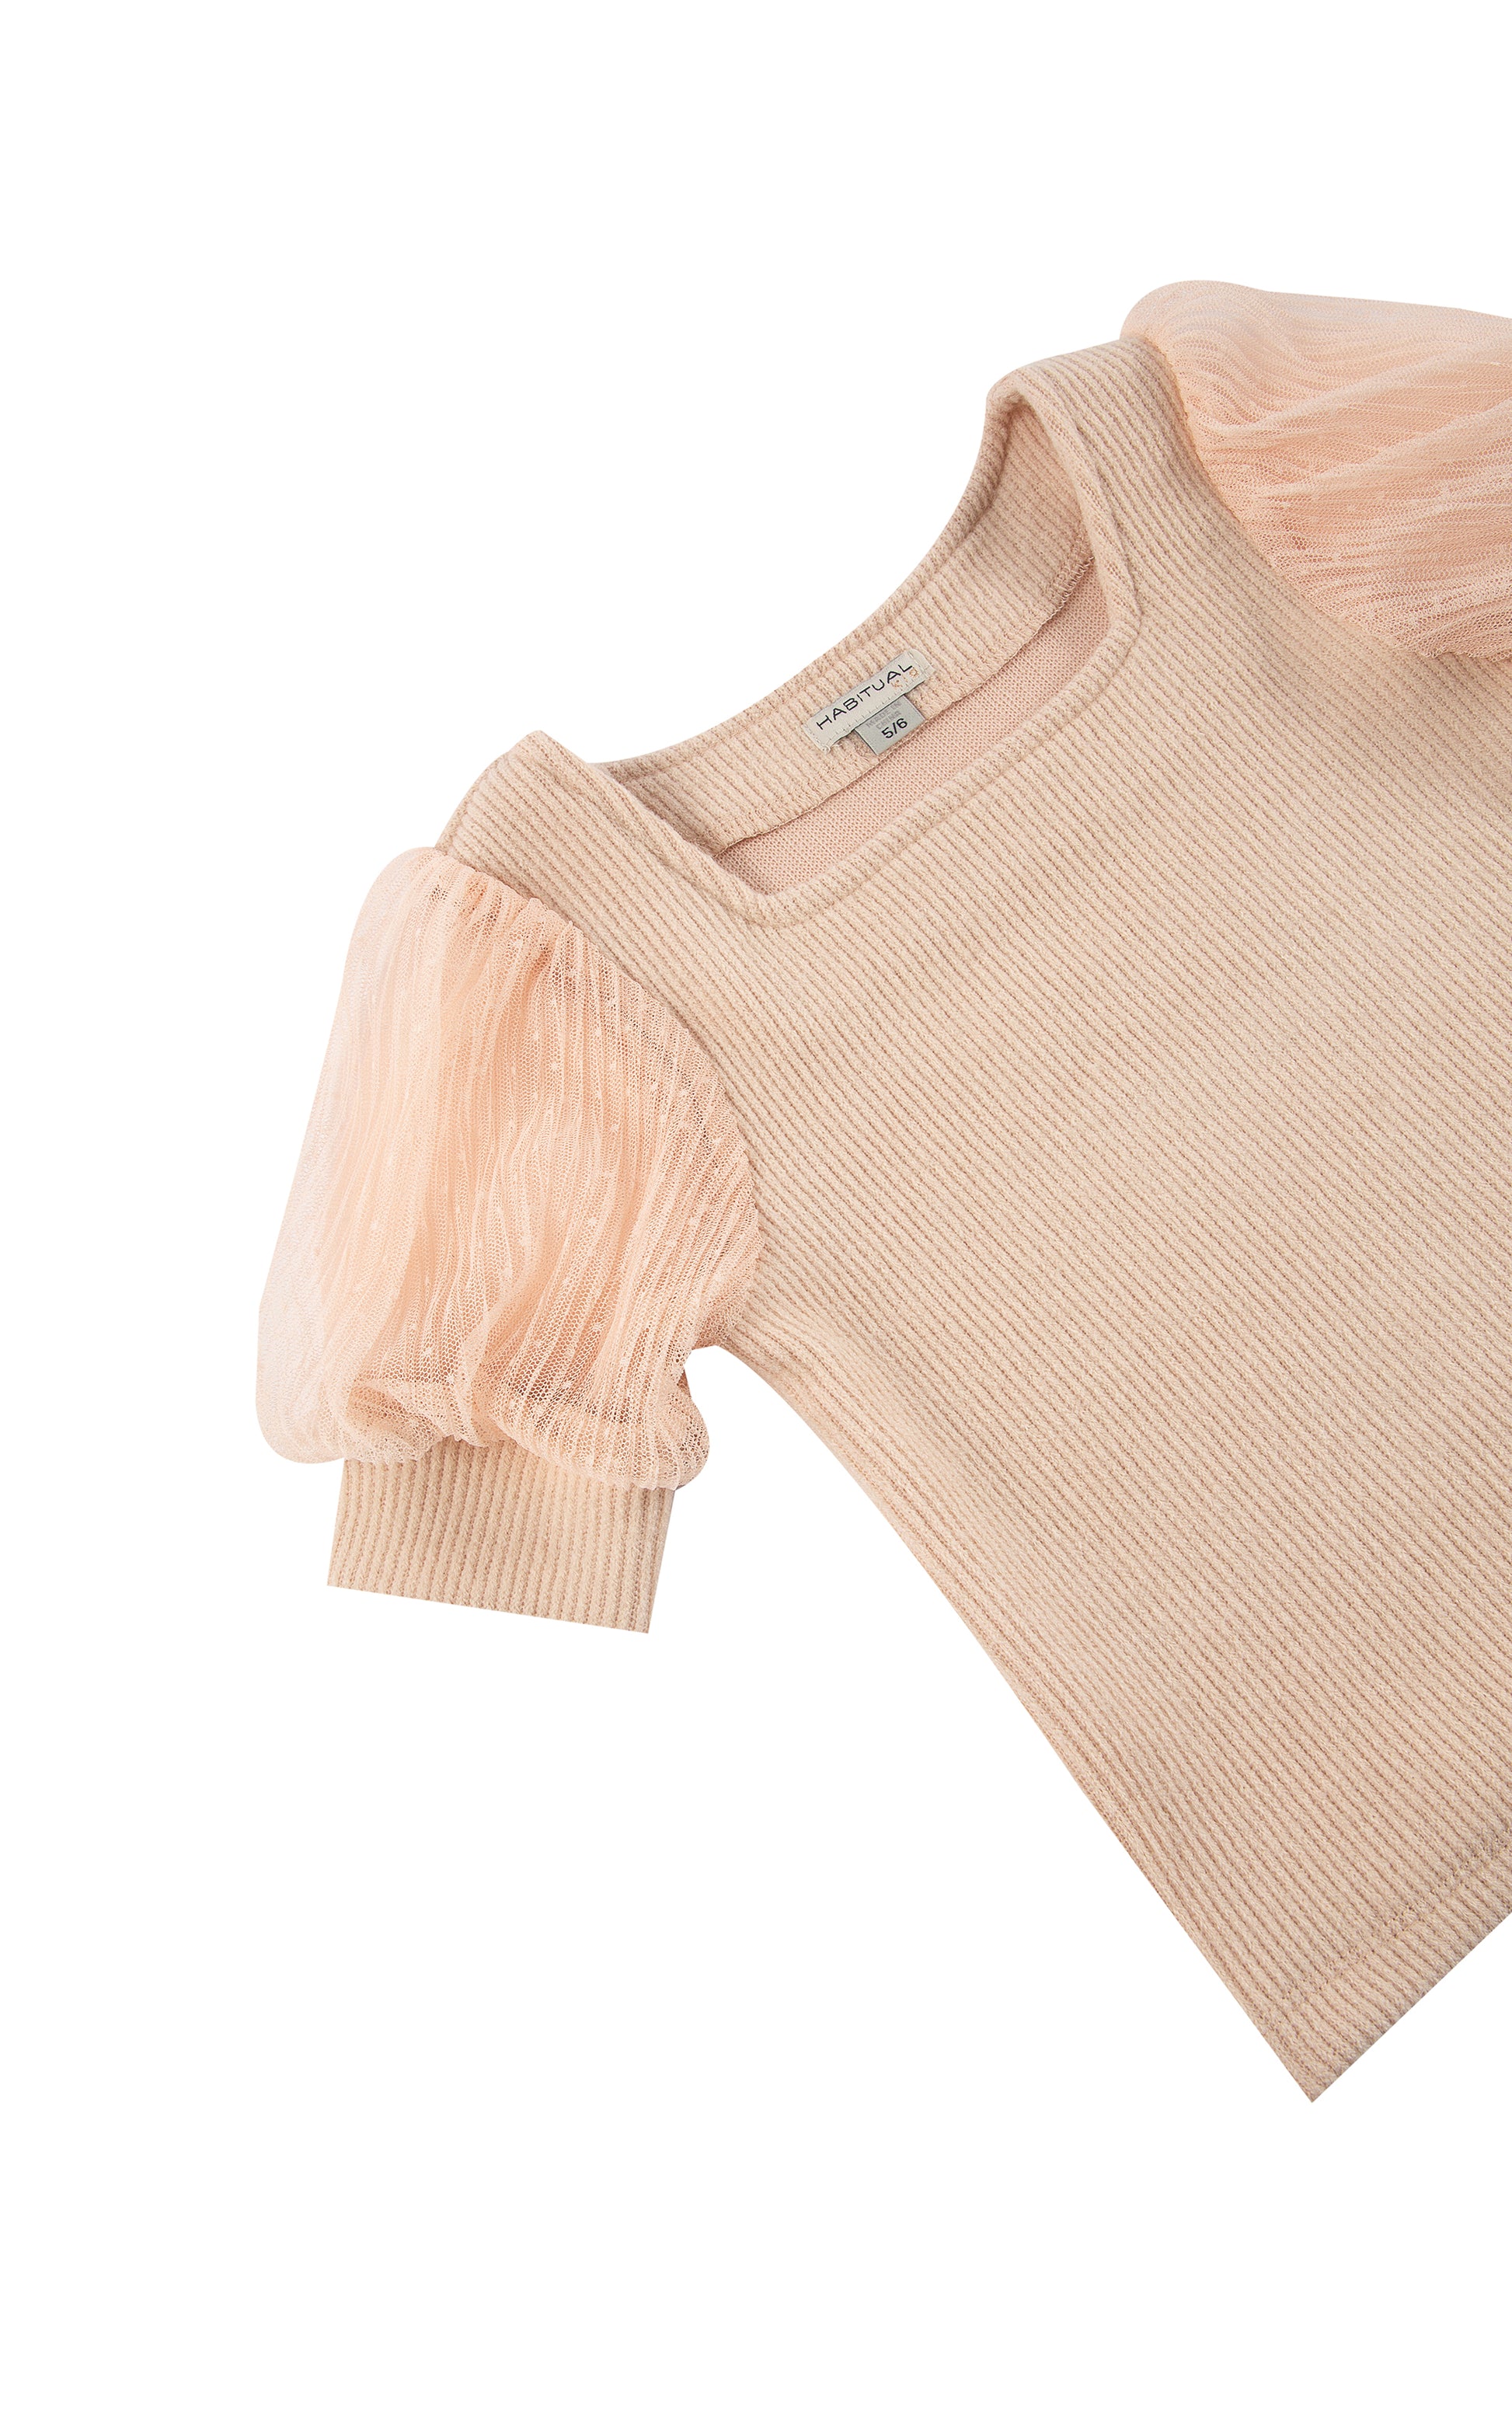 Detail view of pink sweater 